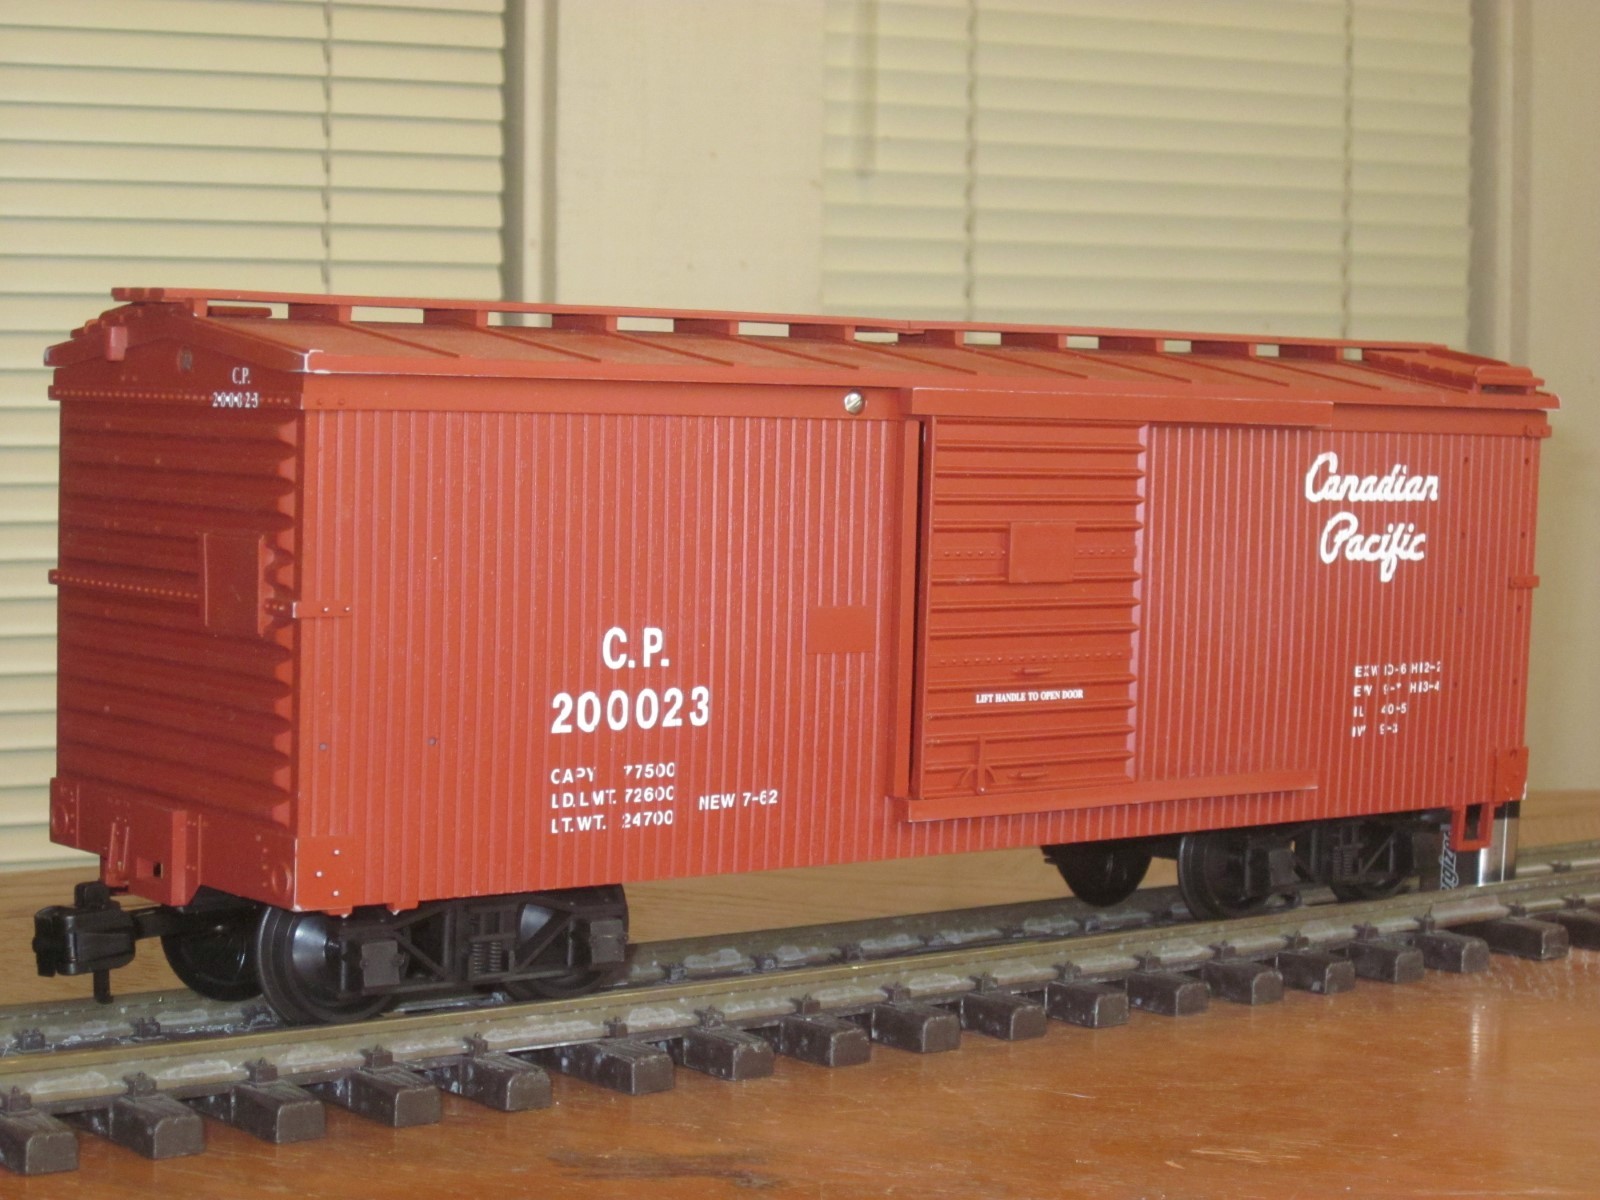 R1958 Canadian Pacific #CP 200023